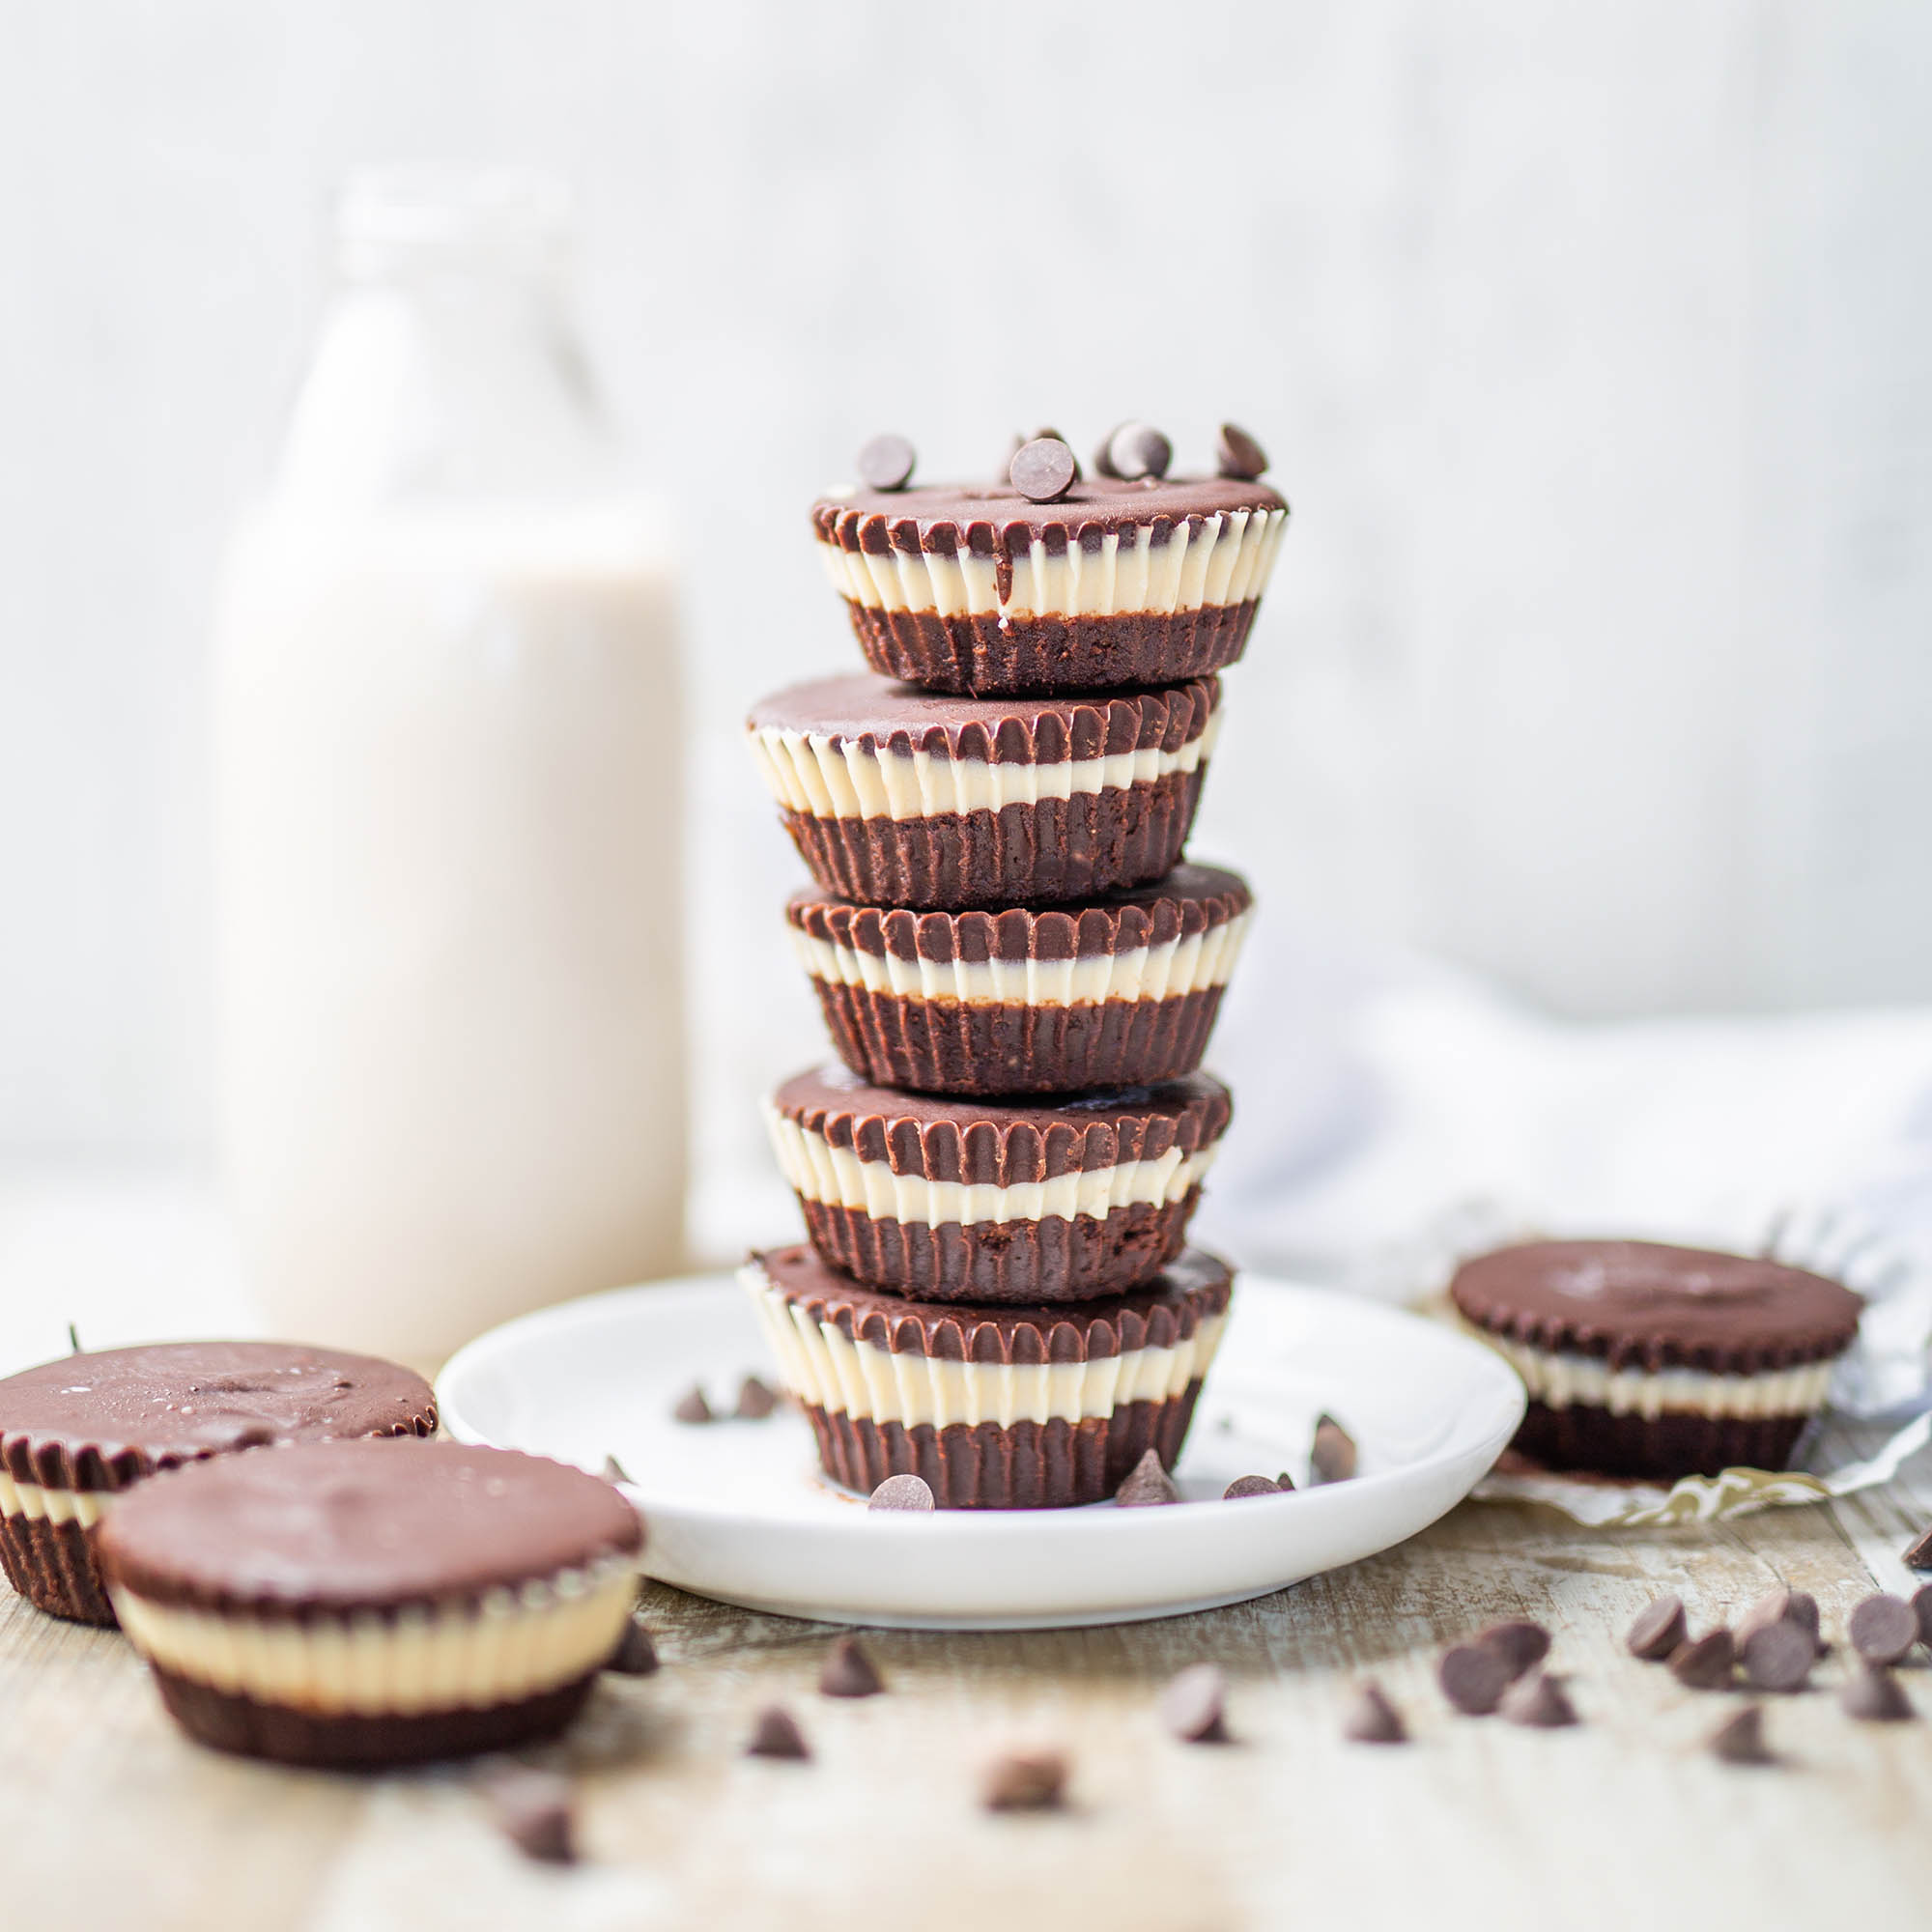 Sunflower Butter Chocolate Cups with Vegan White Chocolate Centre